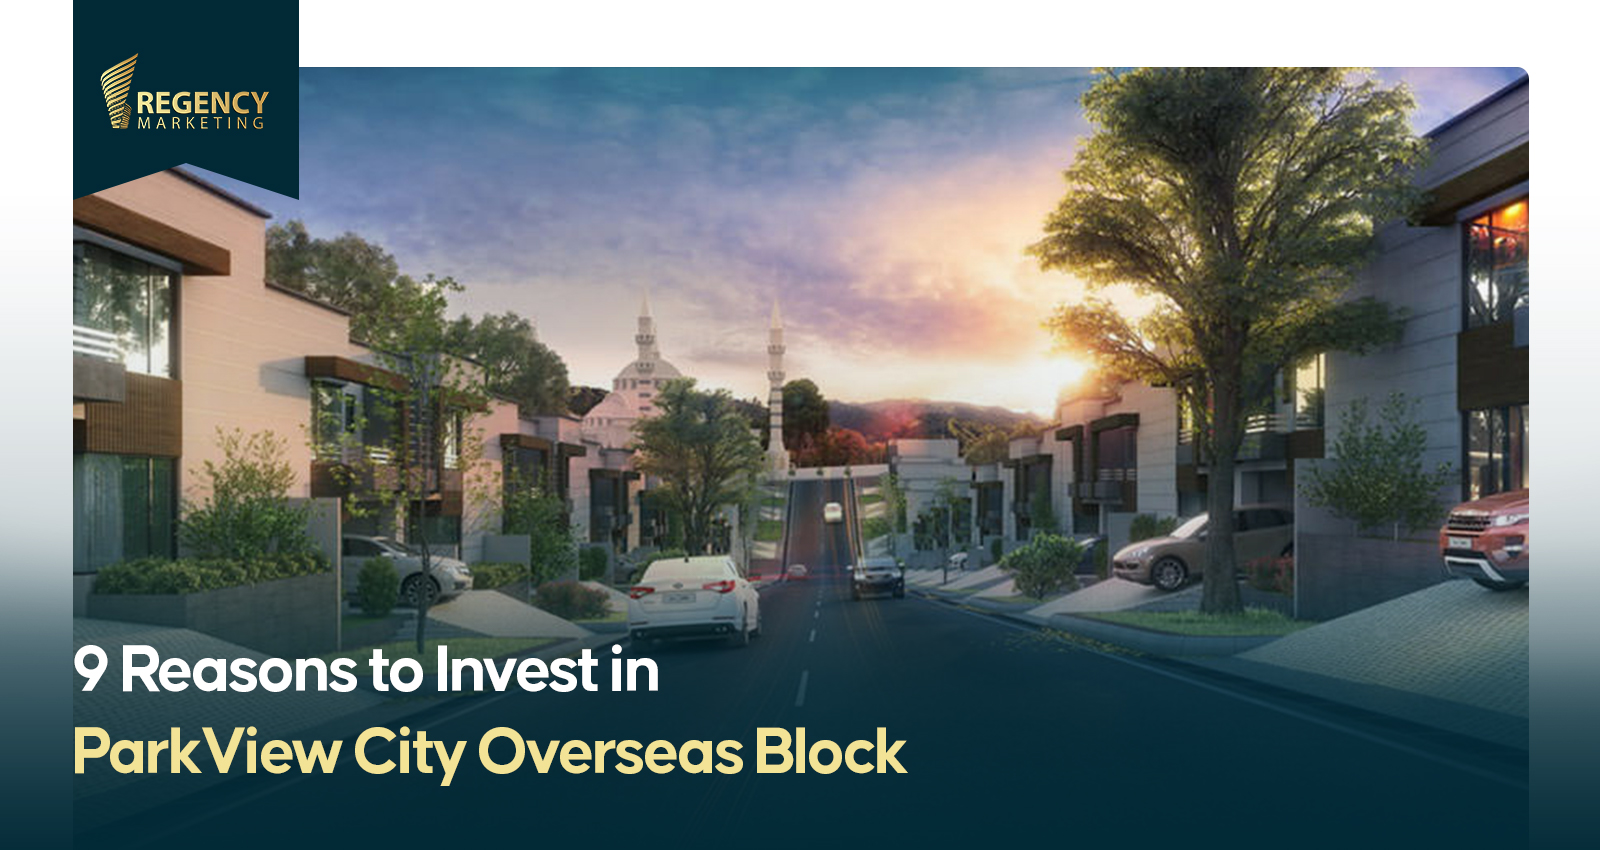 9 Reasons to invest in PVC Overseas Block